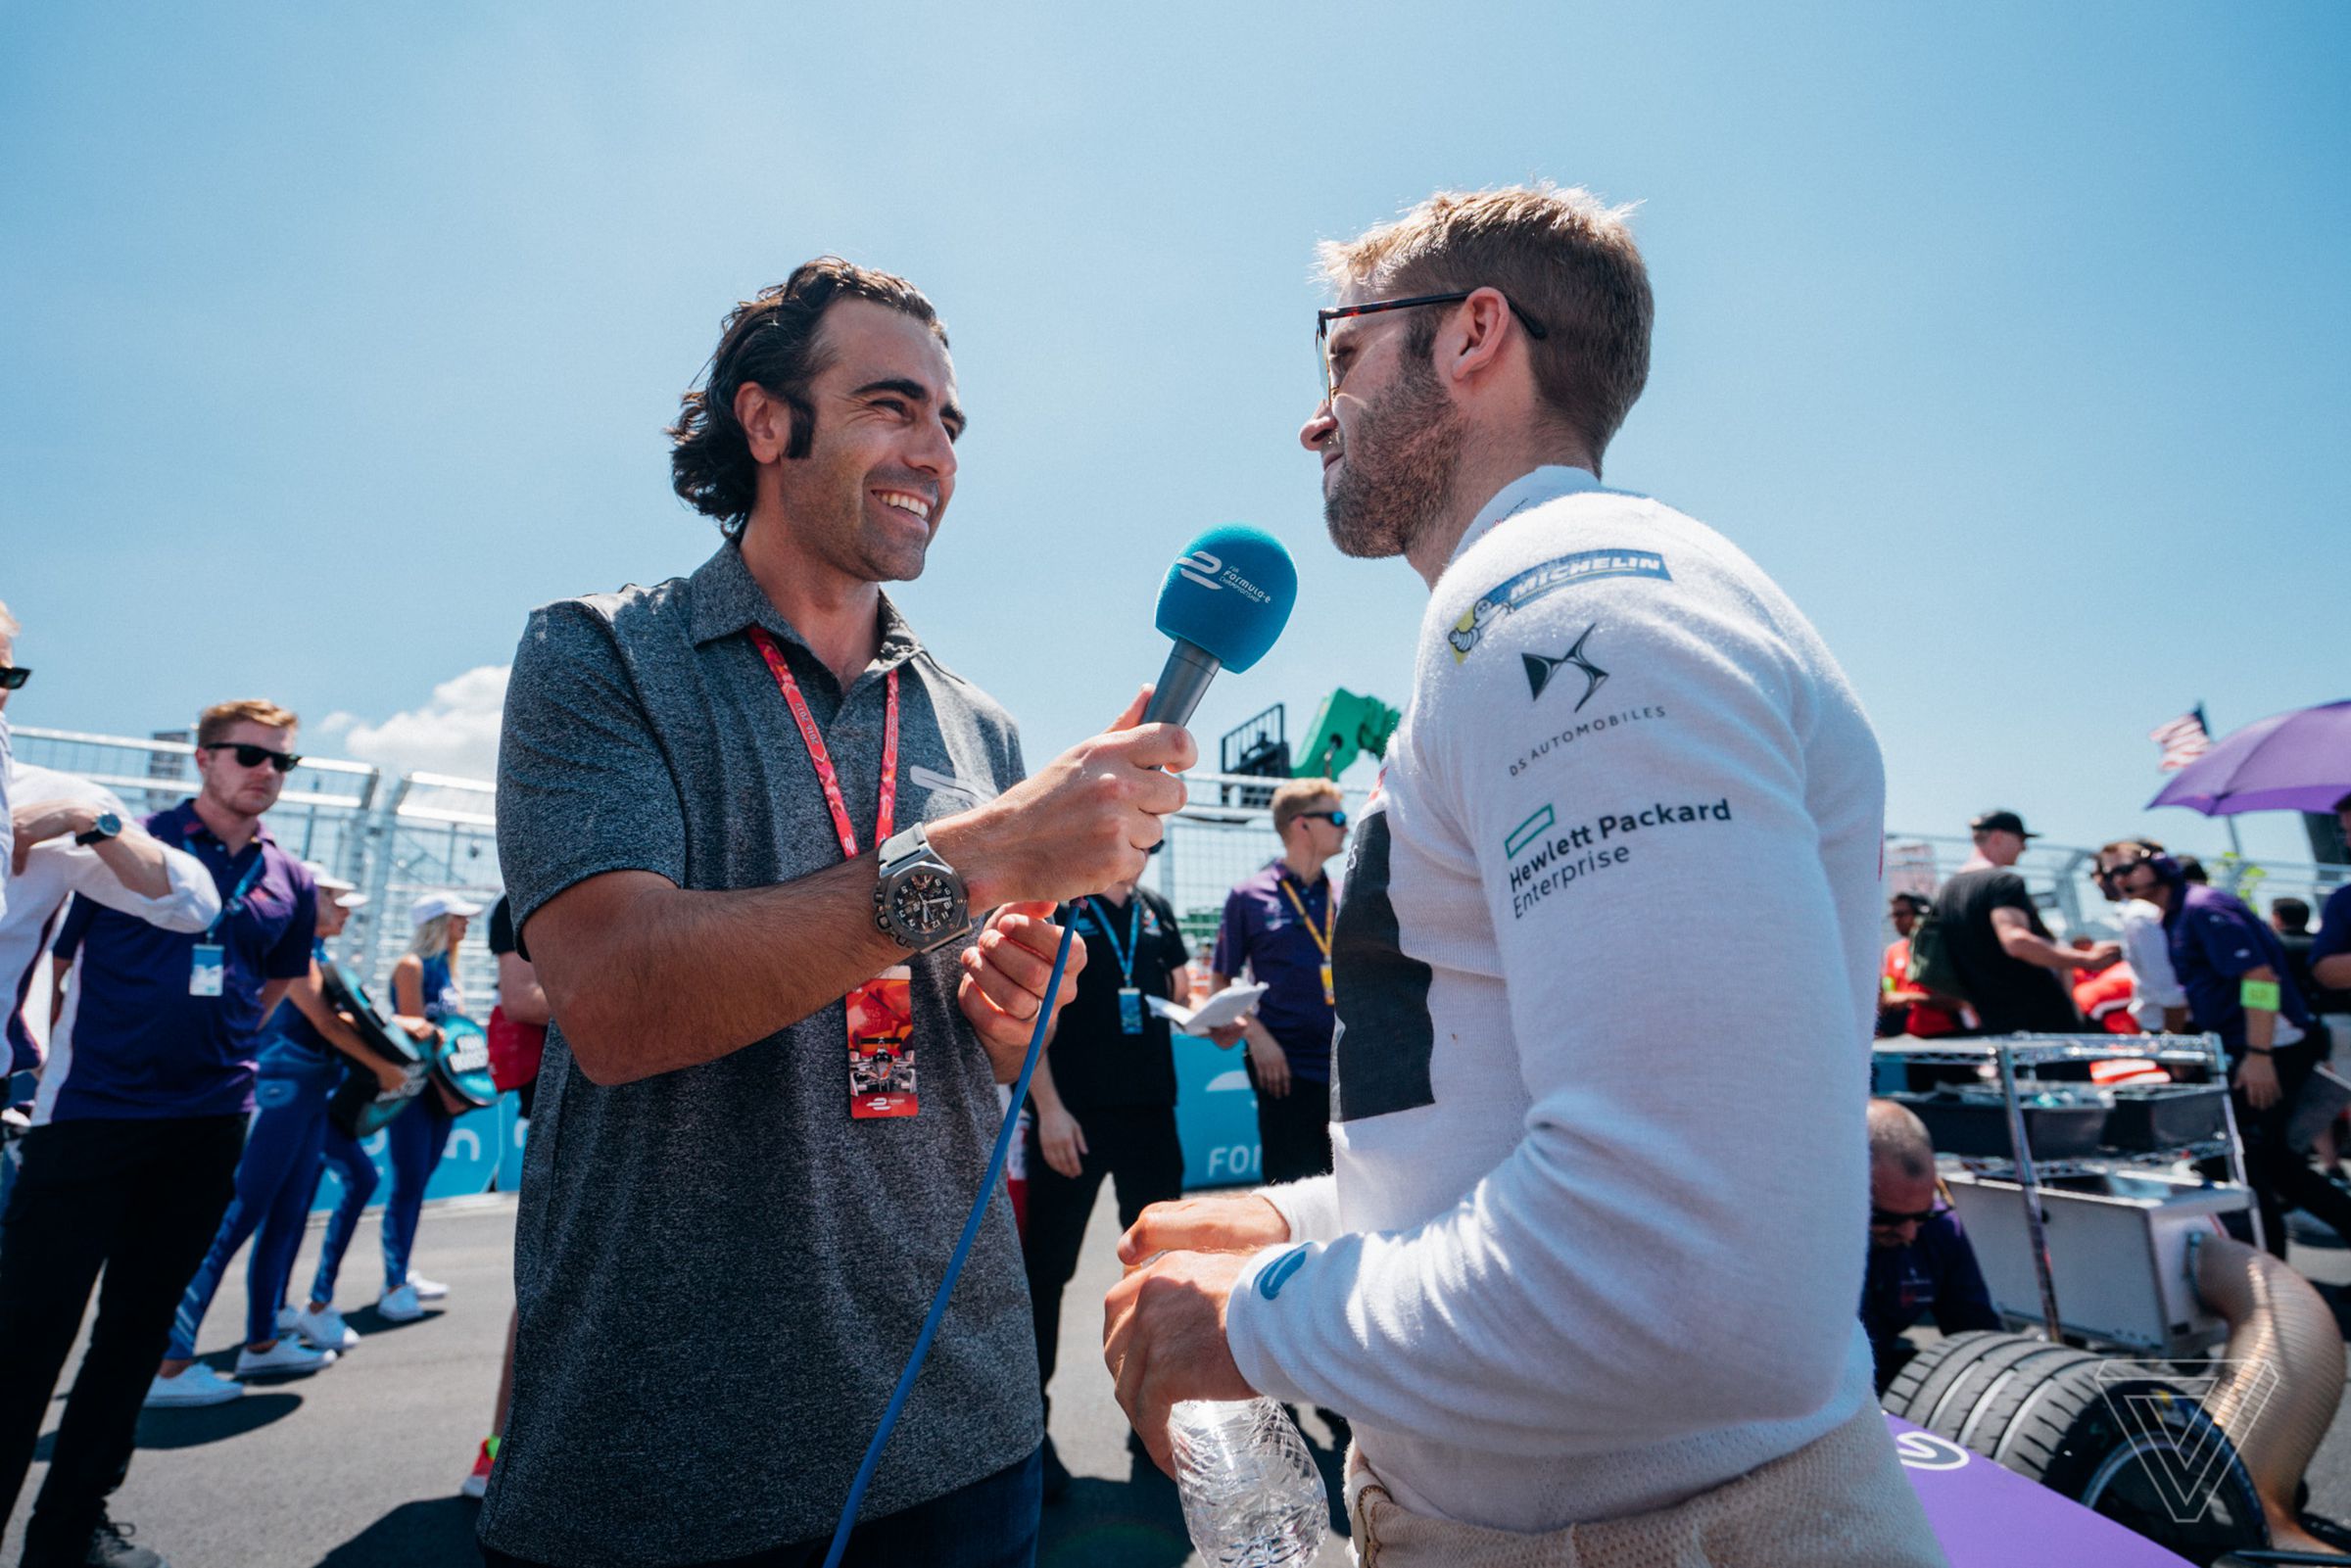 Four-time IndyCar champion and three-time Indy 500 winner Dario Franchitti, who is one of the main broadcasters for Formula E, interviews Sam Bird before the race.